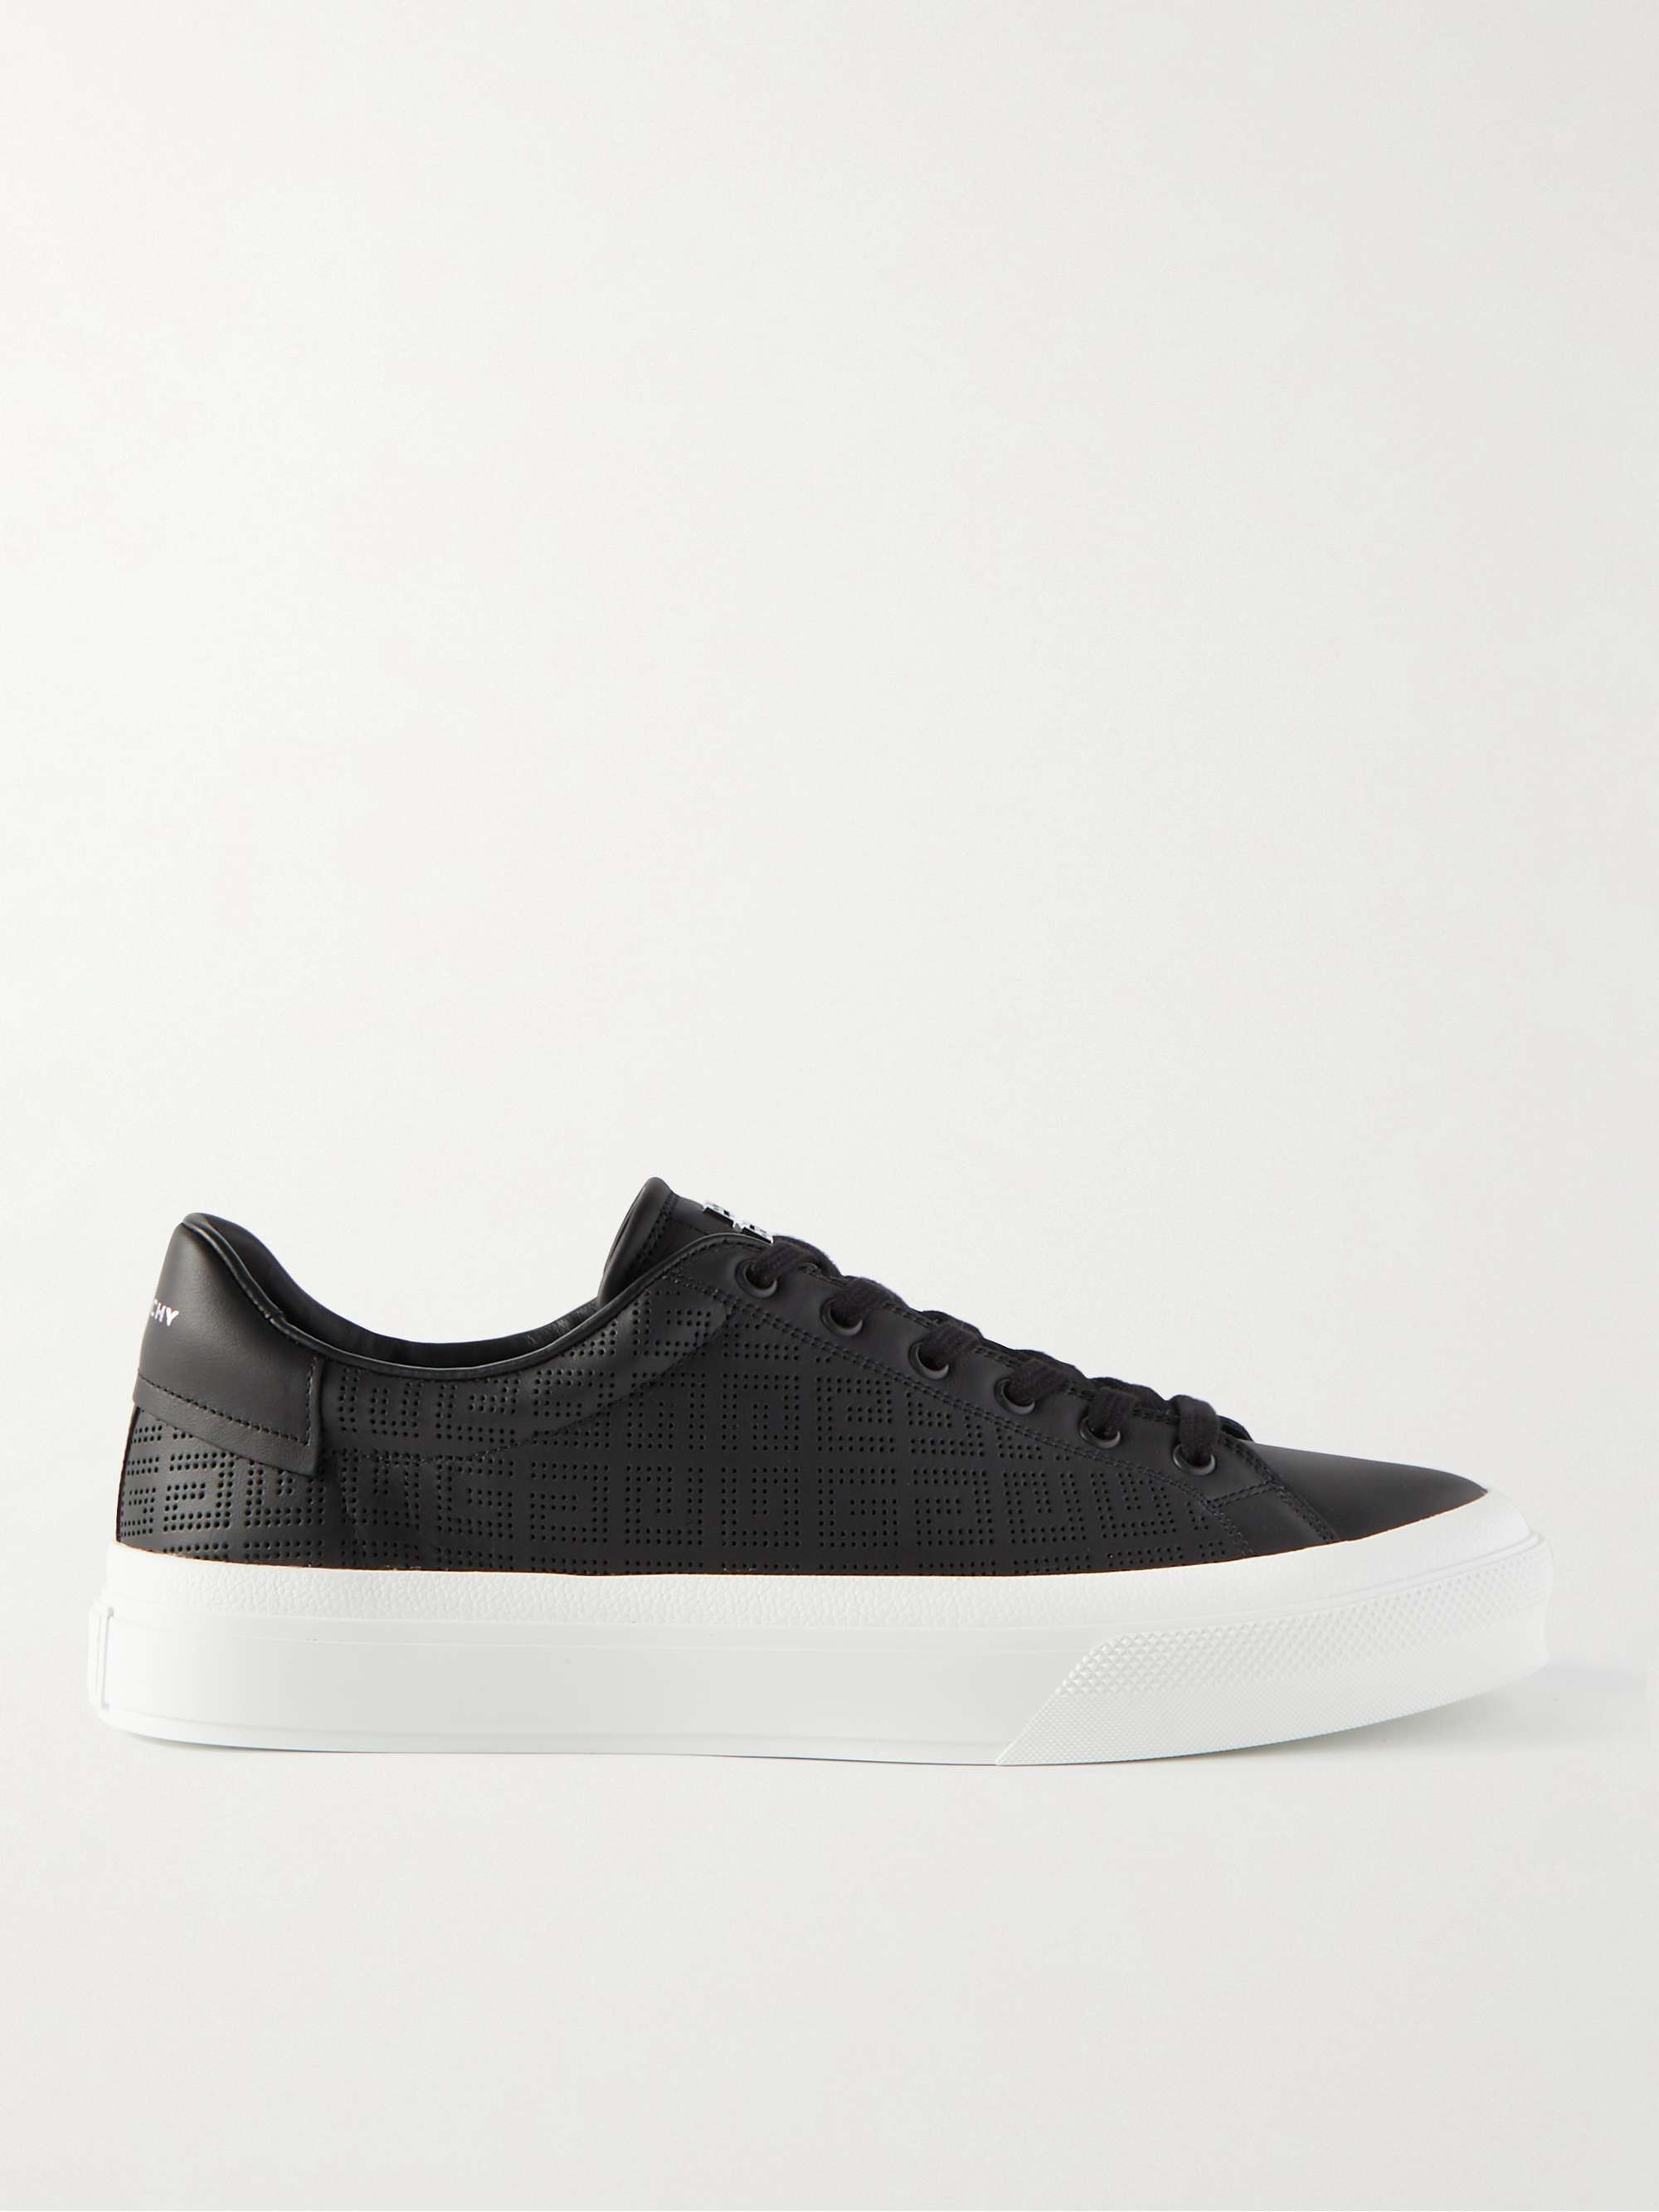 GIVENCHY City Sport Logo-Embossed Leather Sneakers | MR PORTER